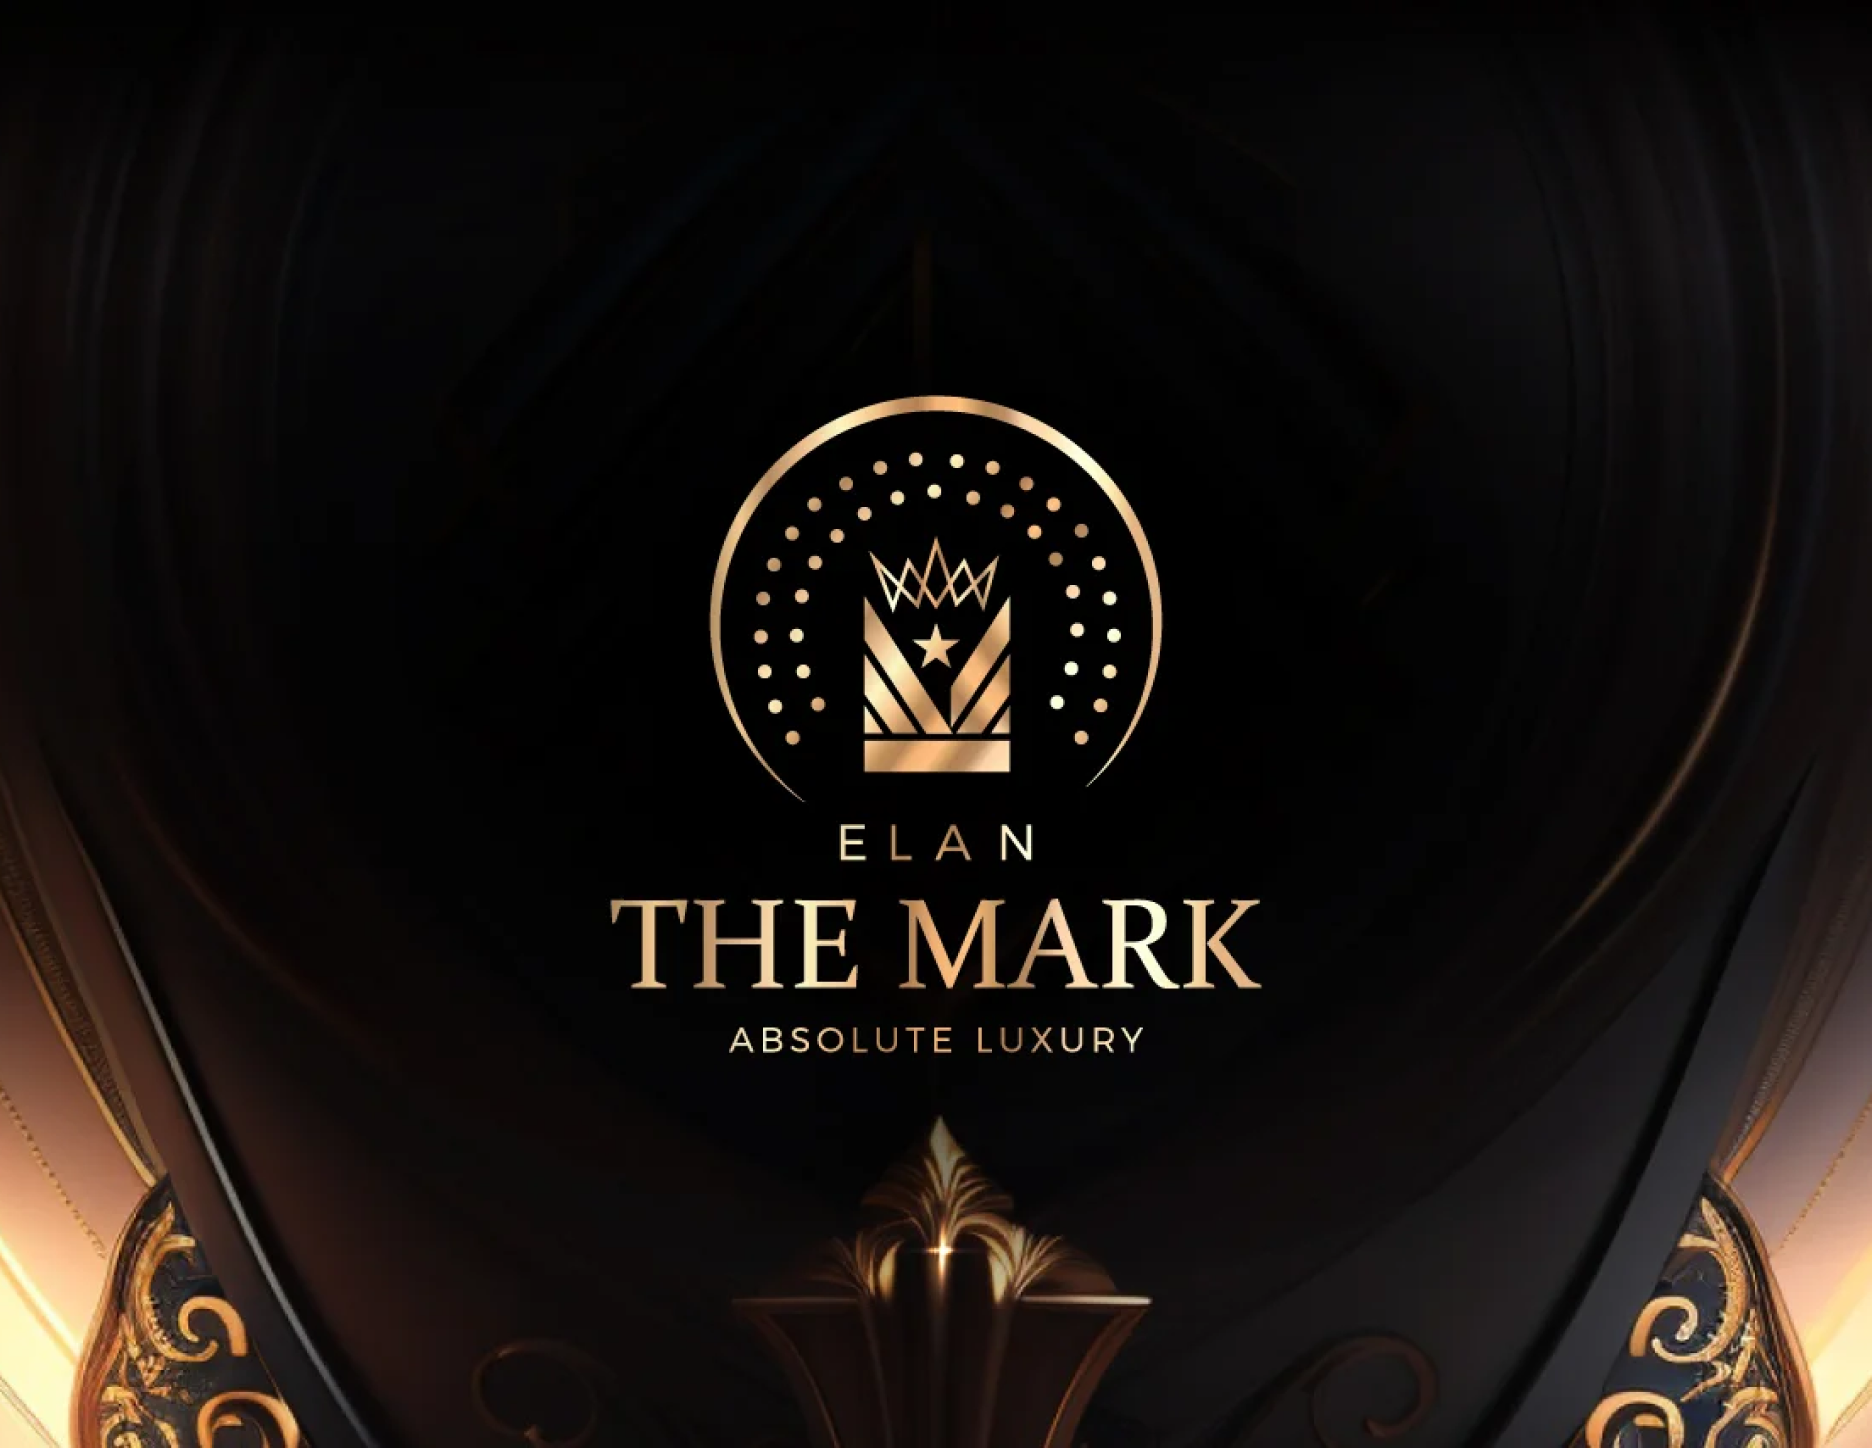 About ELAN: The Mark - Absolute Luxury